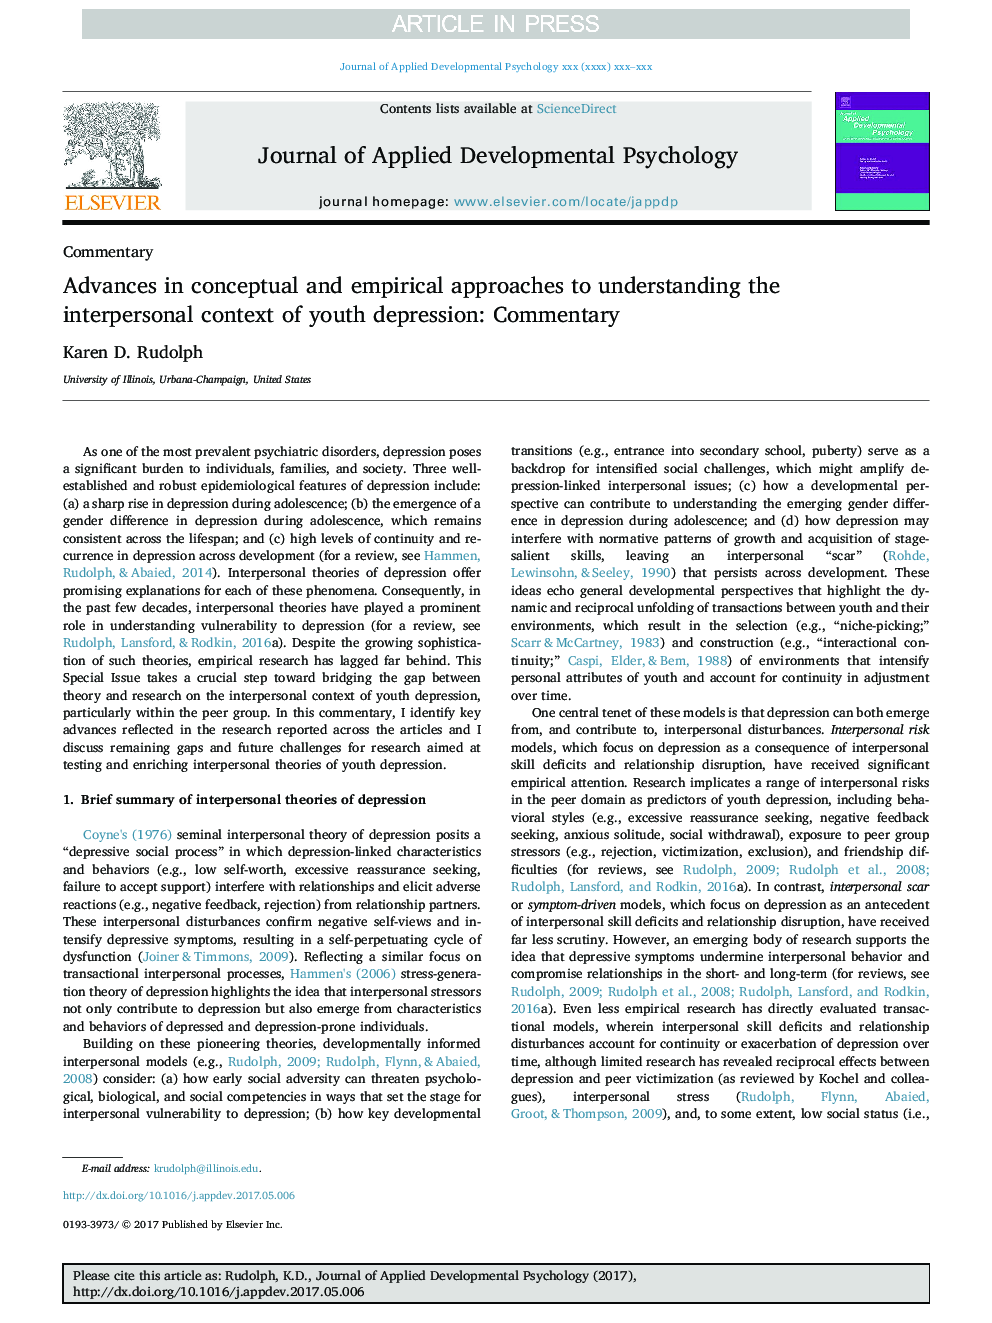 Advances in conceptual and empirical approaches to understanding the interpersonal context of youth depression: Commentary